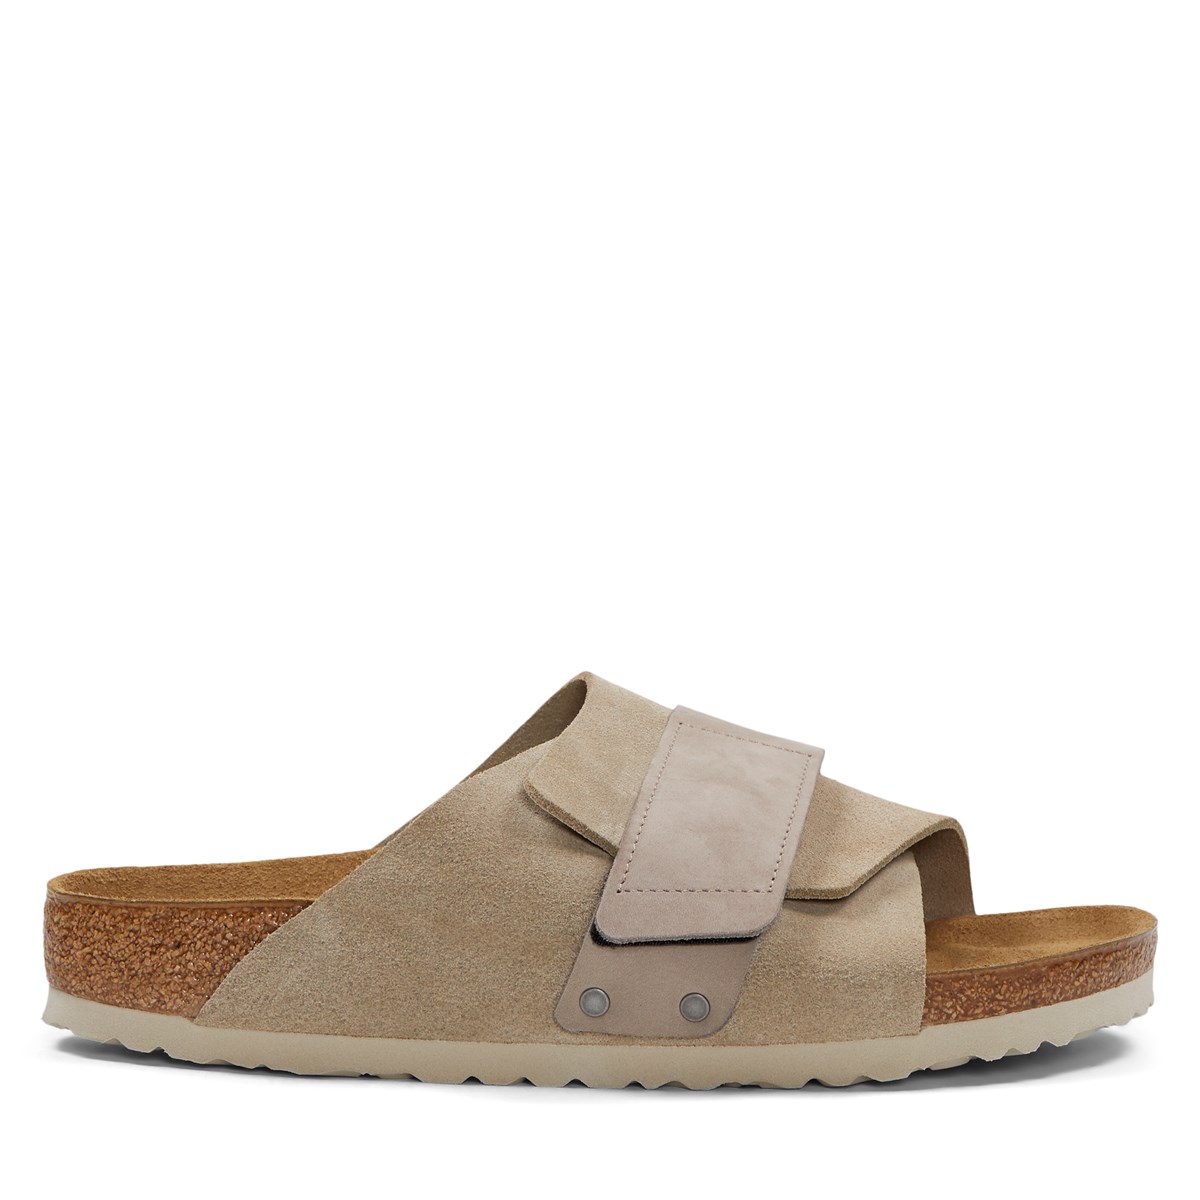 Men's Kyoto Sandals in Taupe